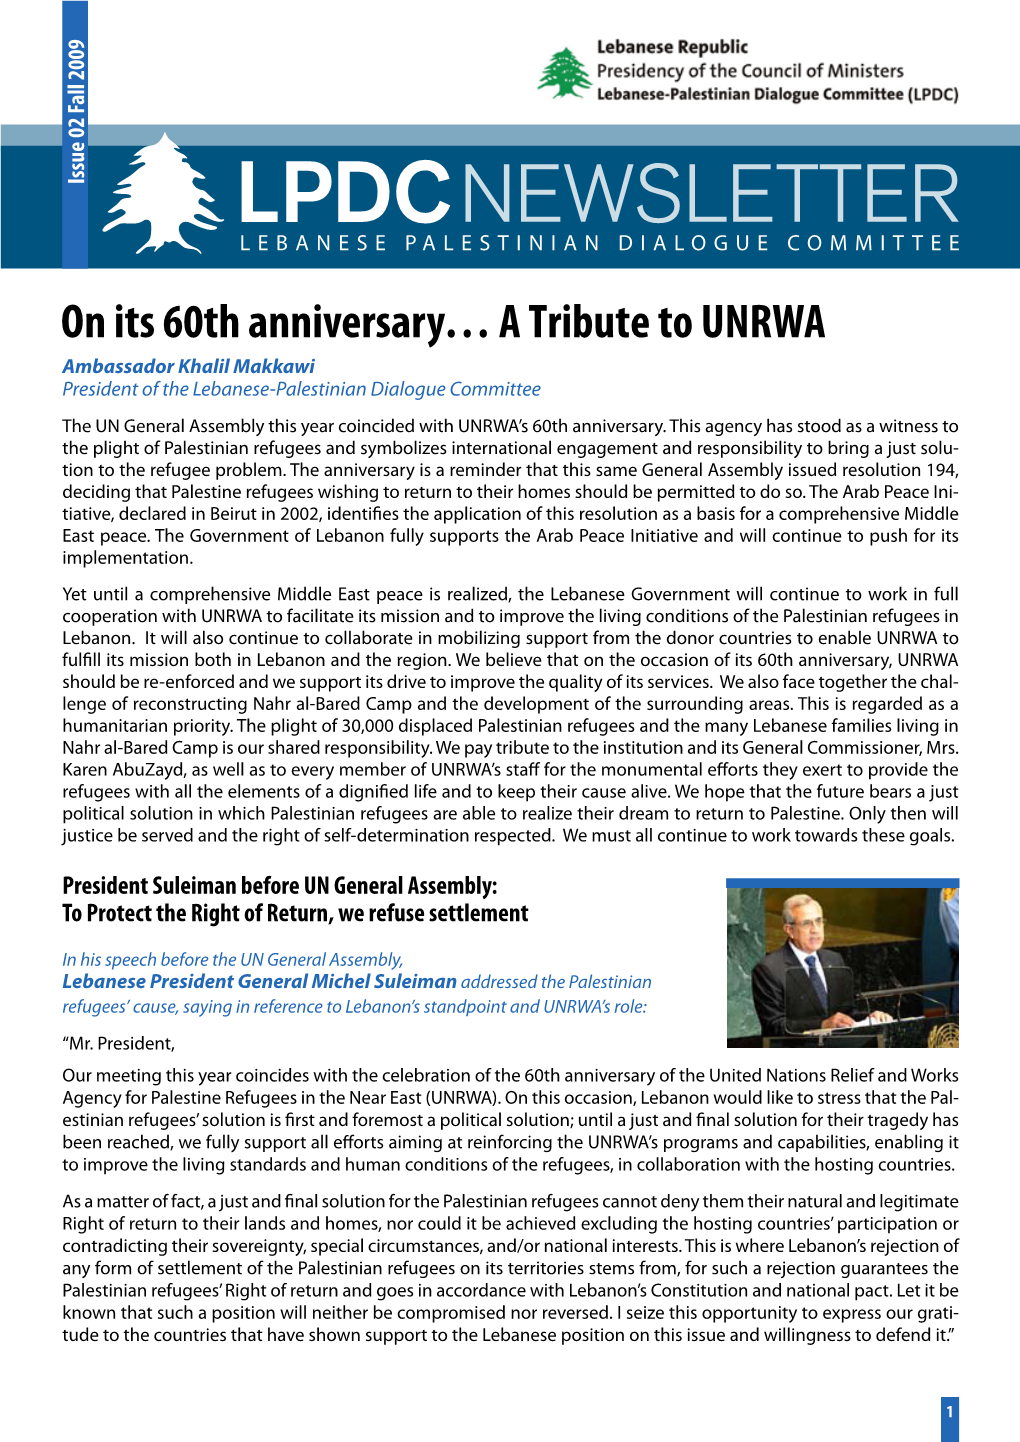 On Its 60Th Anniversary… a Tribute to UNRWA